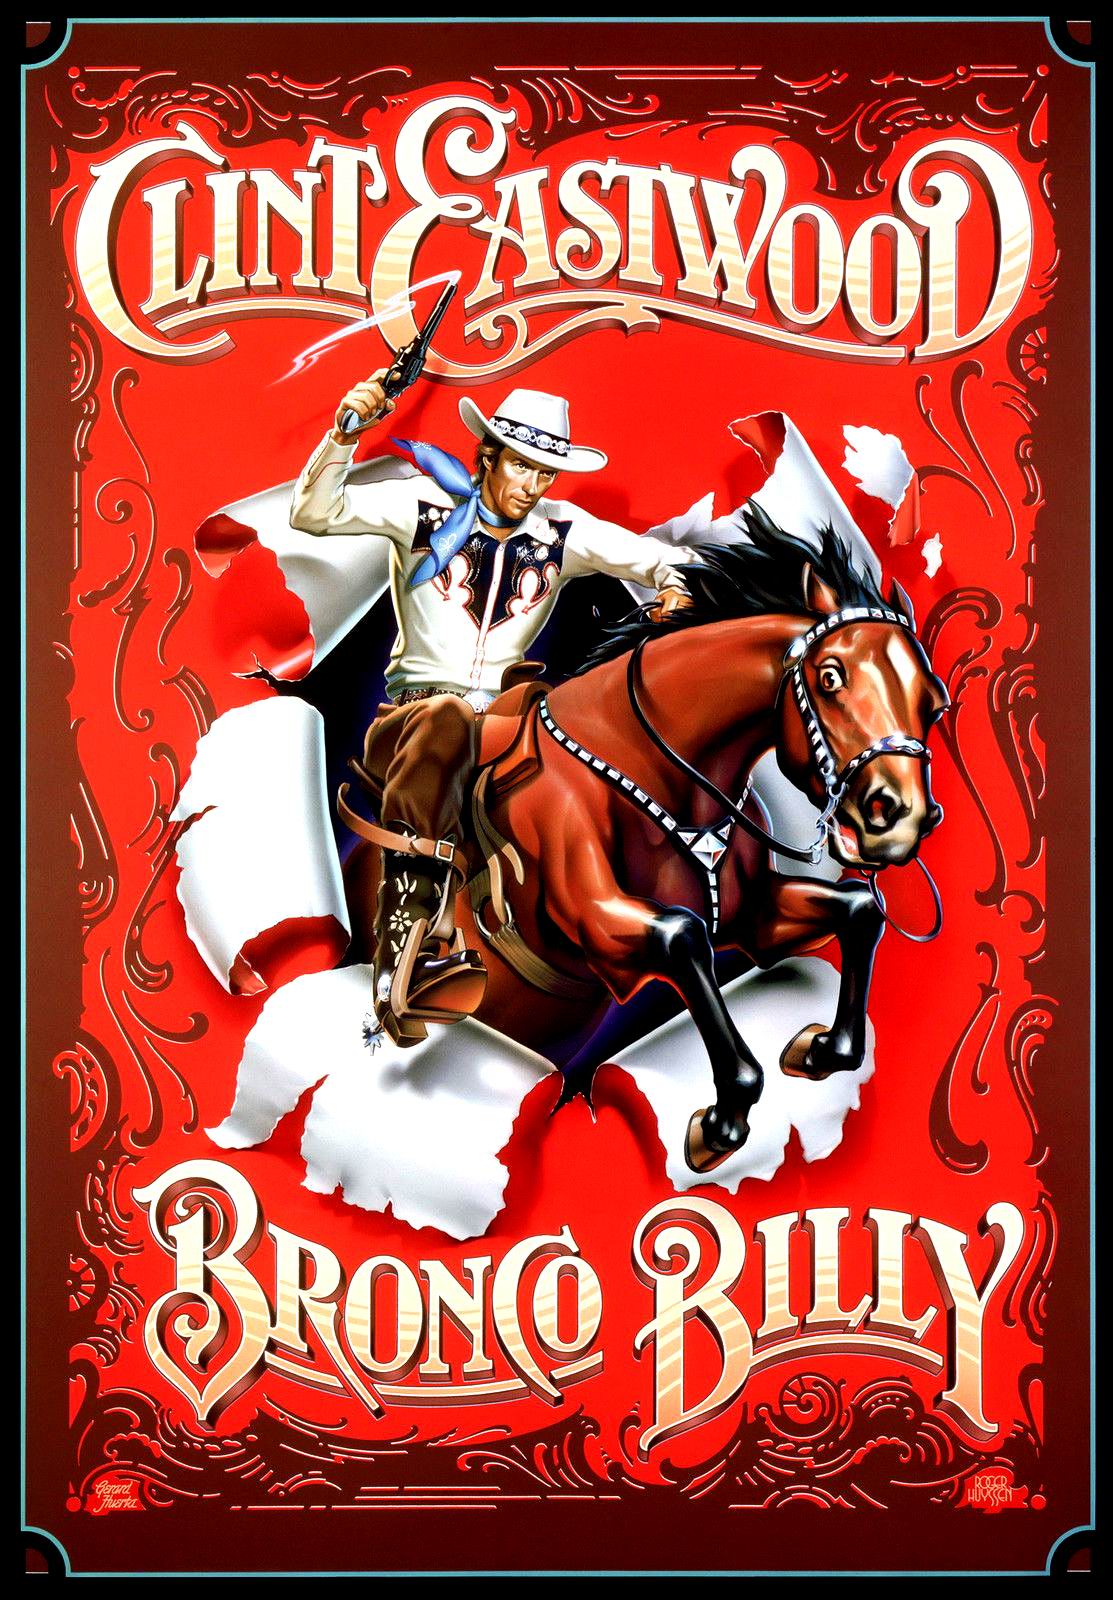 Bronco Billy (1979) Clint Eastwood - Bronco Billy (10.1979 / 1979)